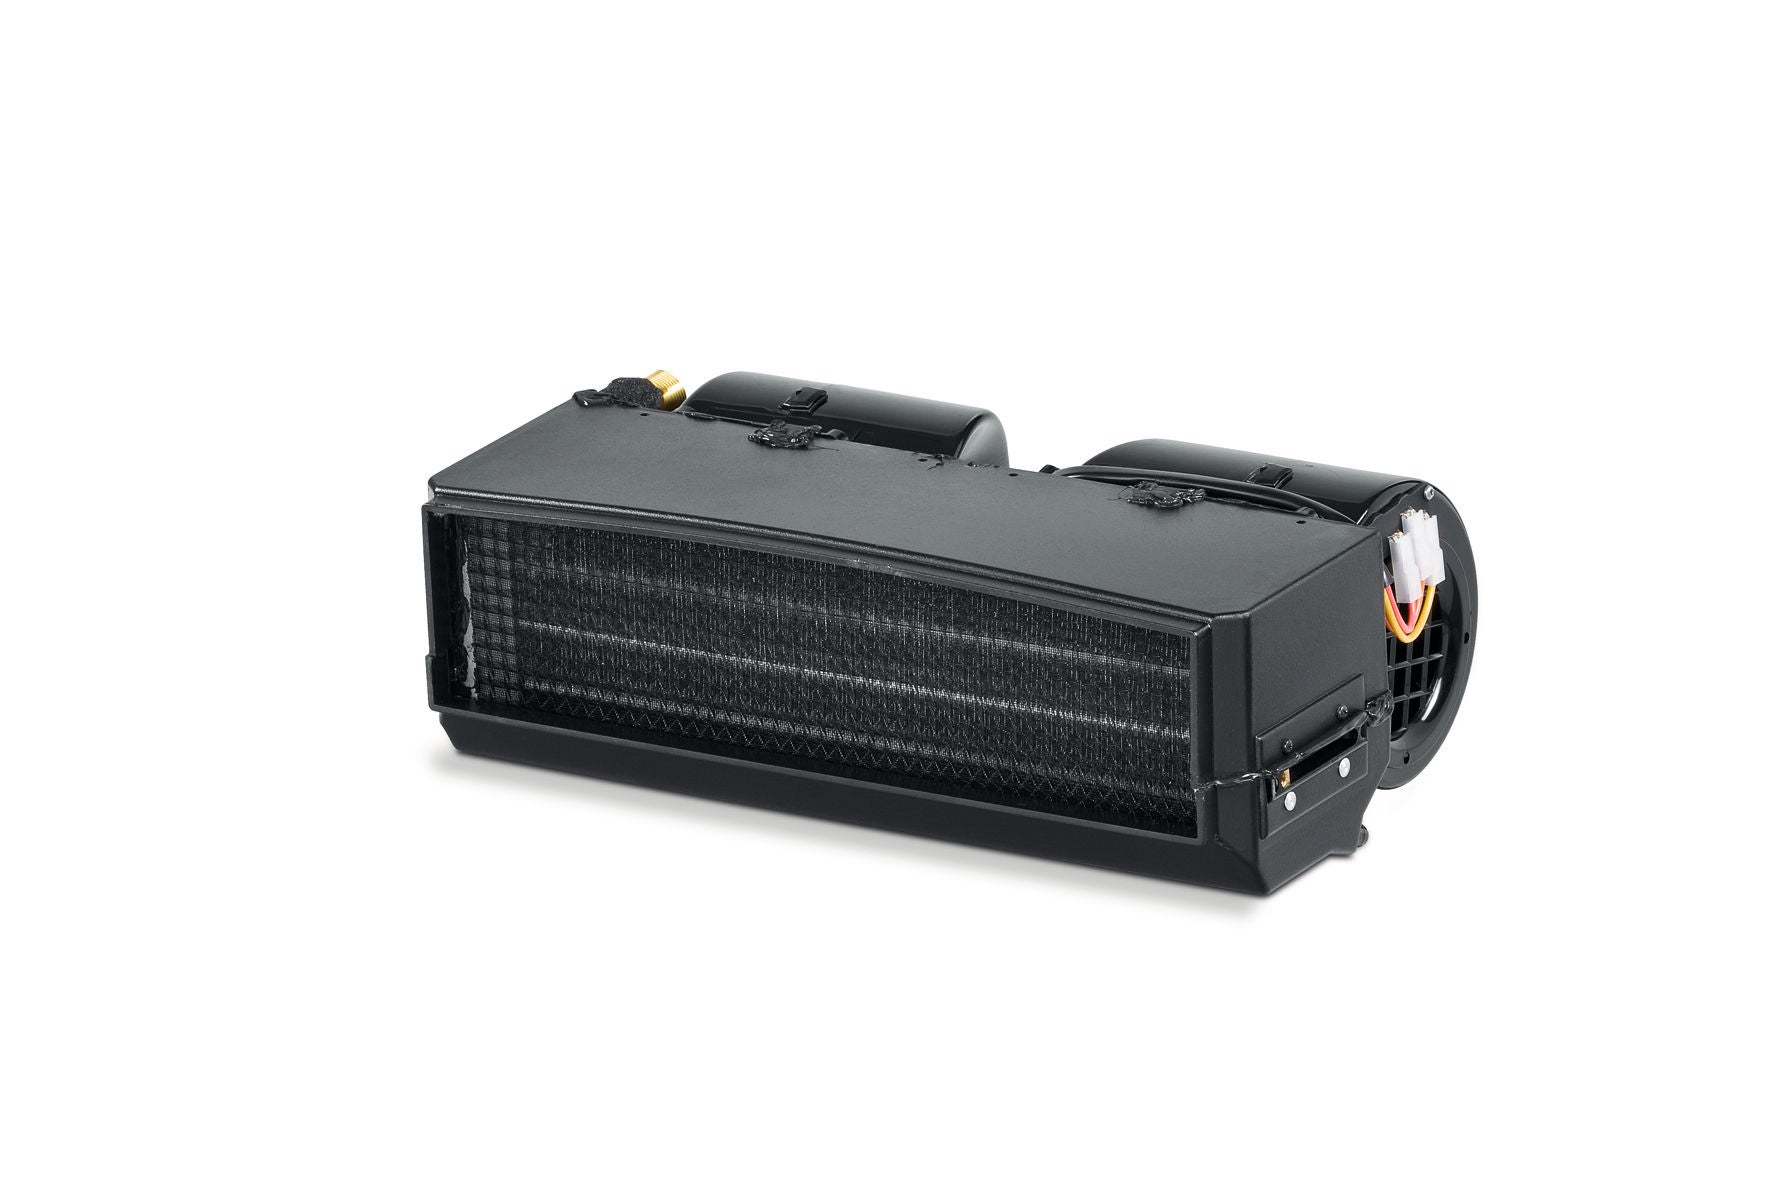 Product picture of Webasto integrated air-conditioning system model Baltimore